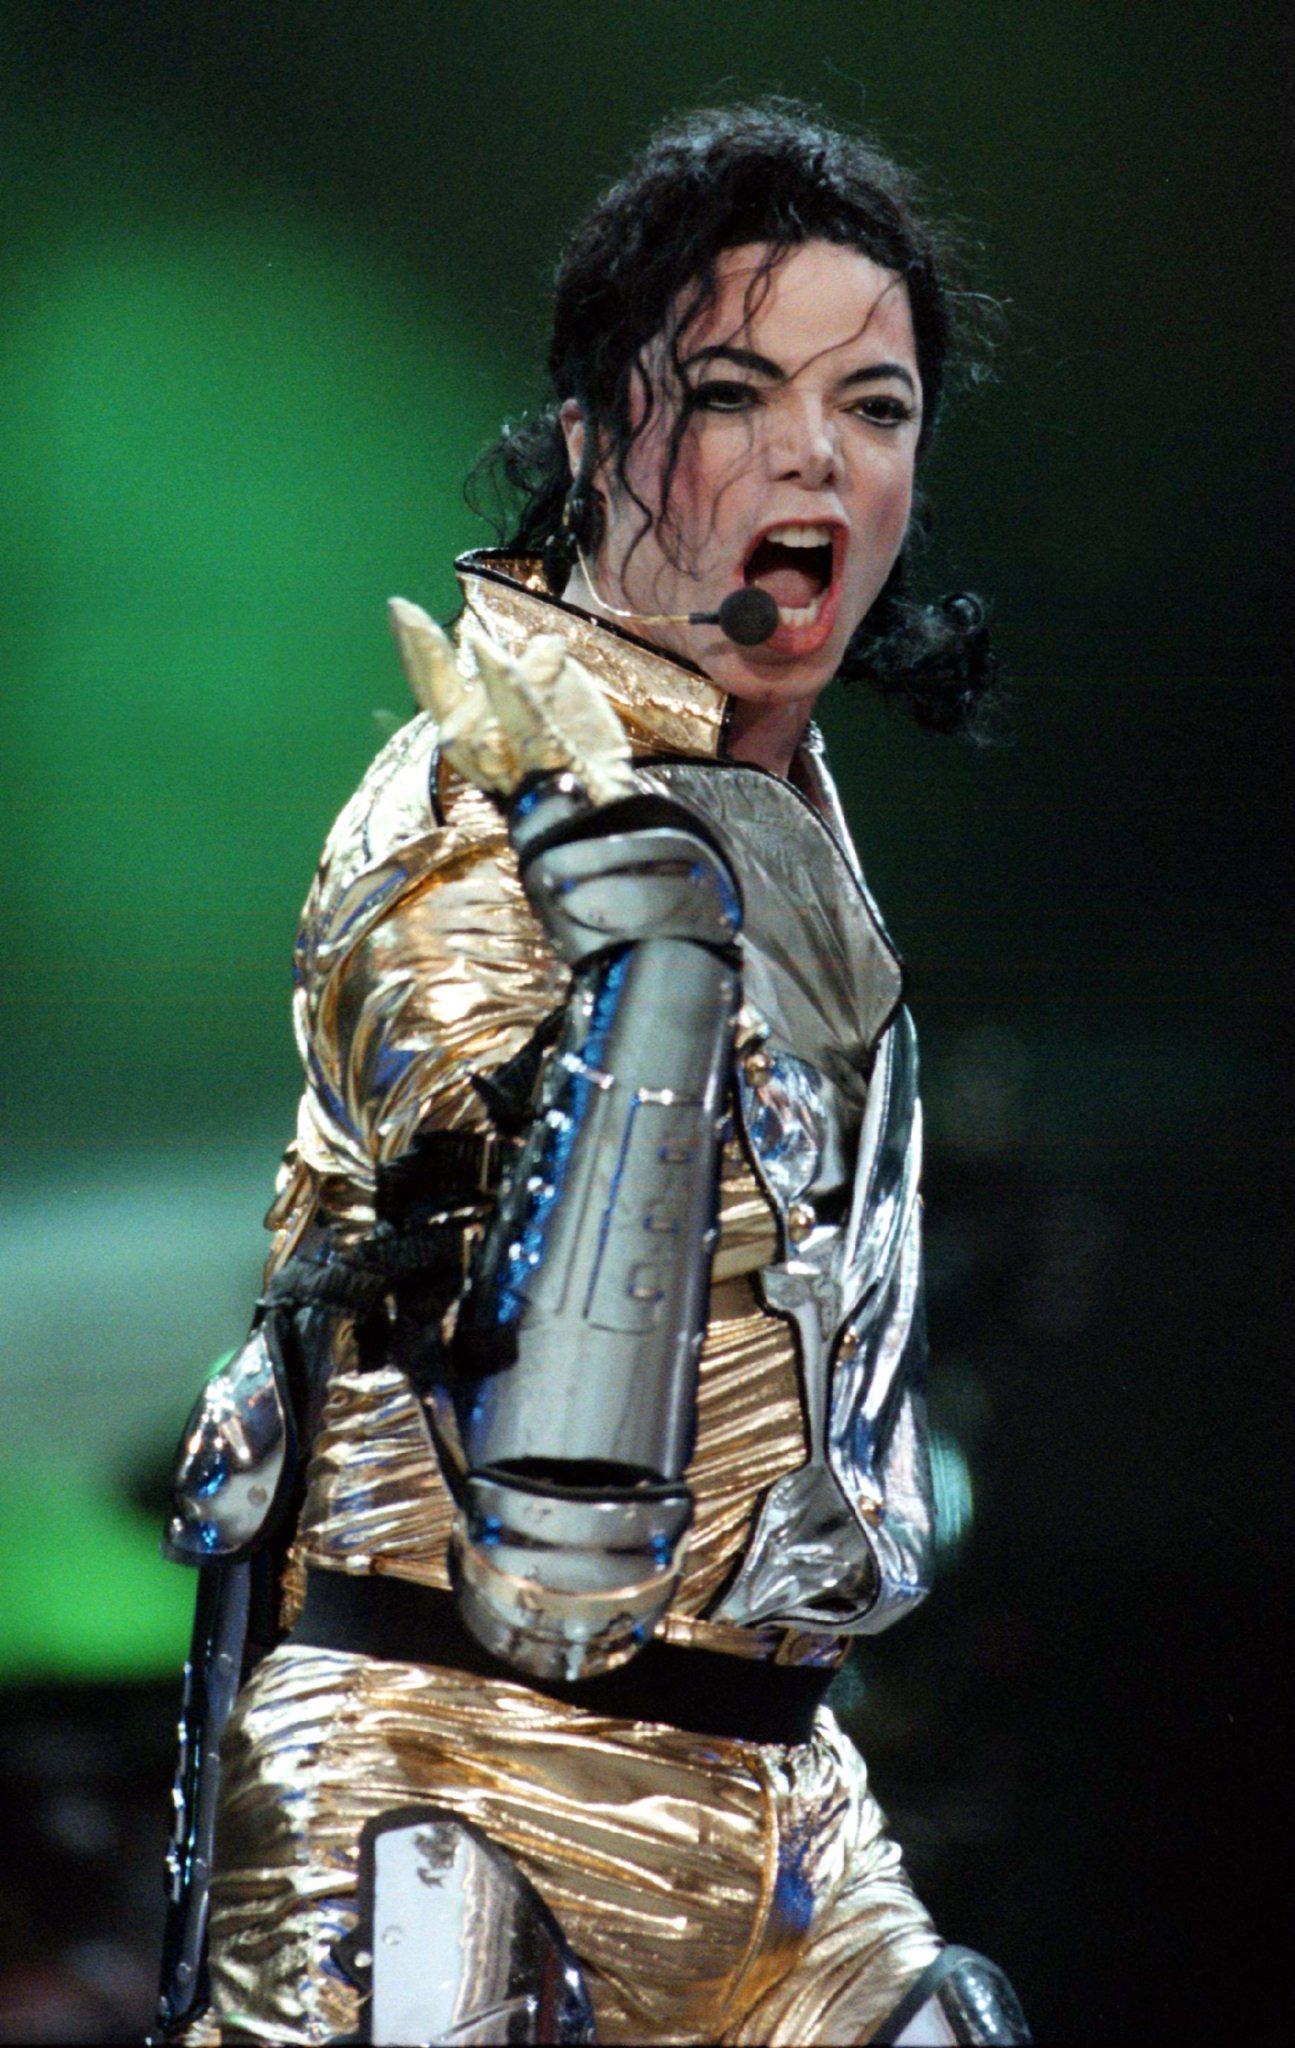 Micheal Jackson performing on stage in a golden outfit.